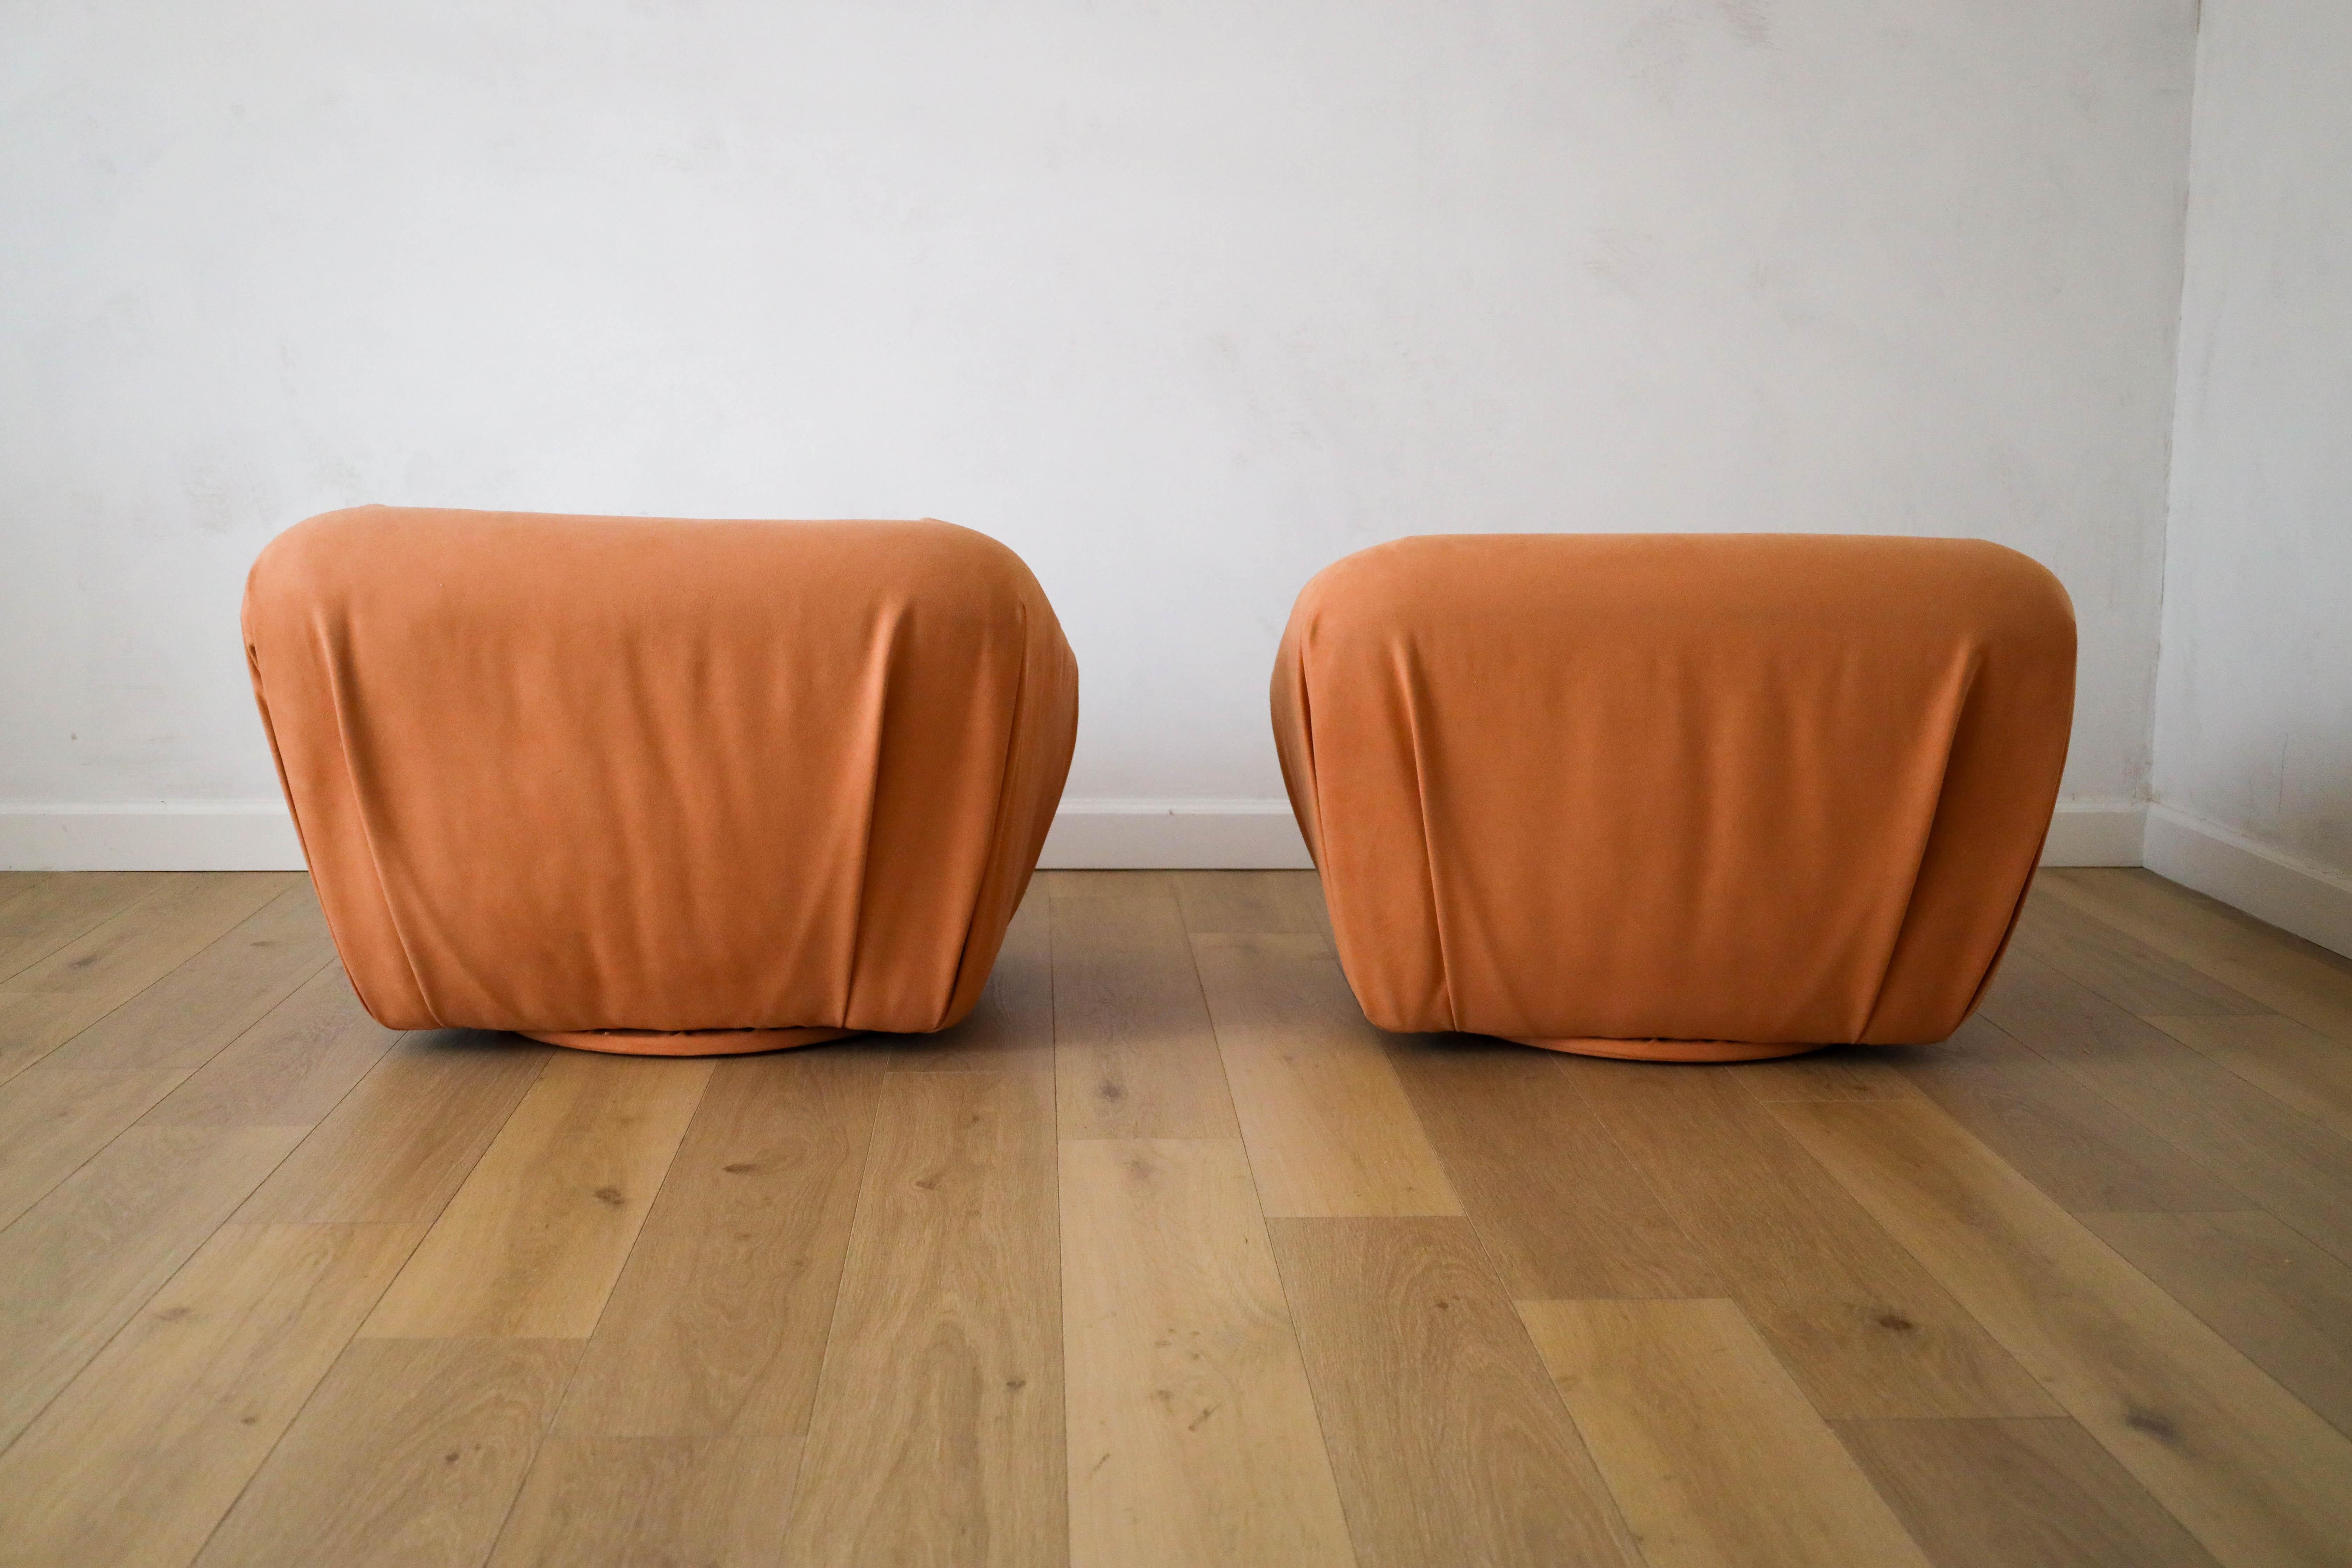 Ultrasuede Vintage Pair 1950s European Swivel Chairs, Suede upholstery by The Romo Group For Sale